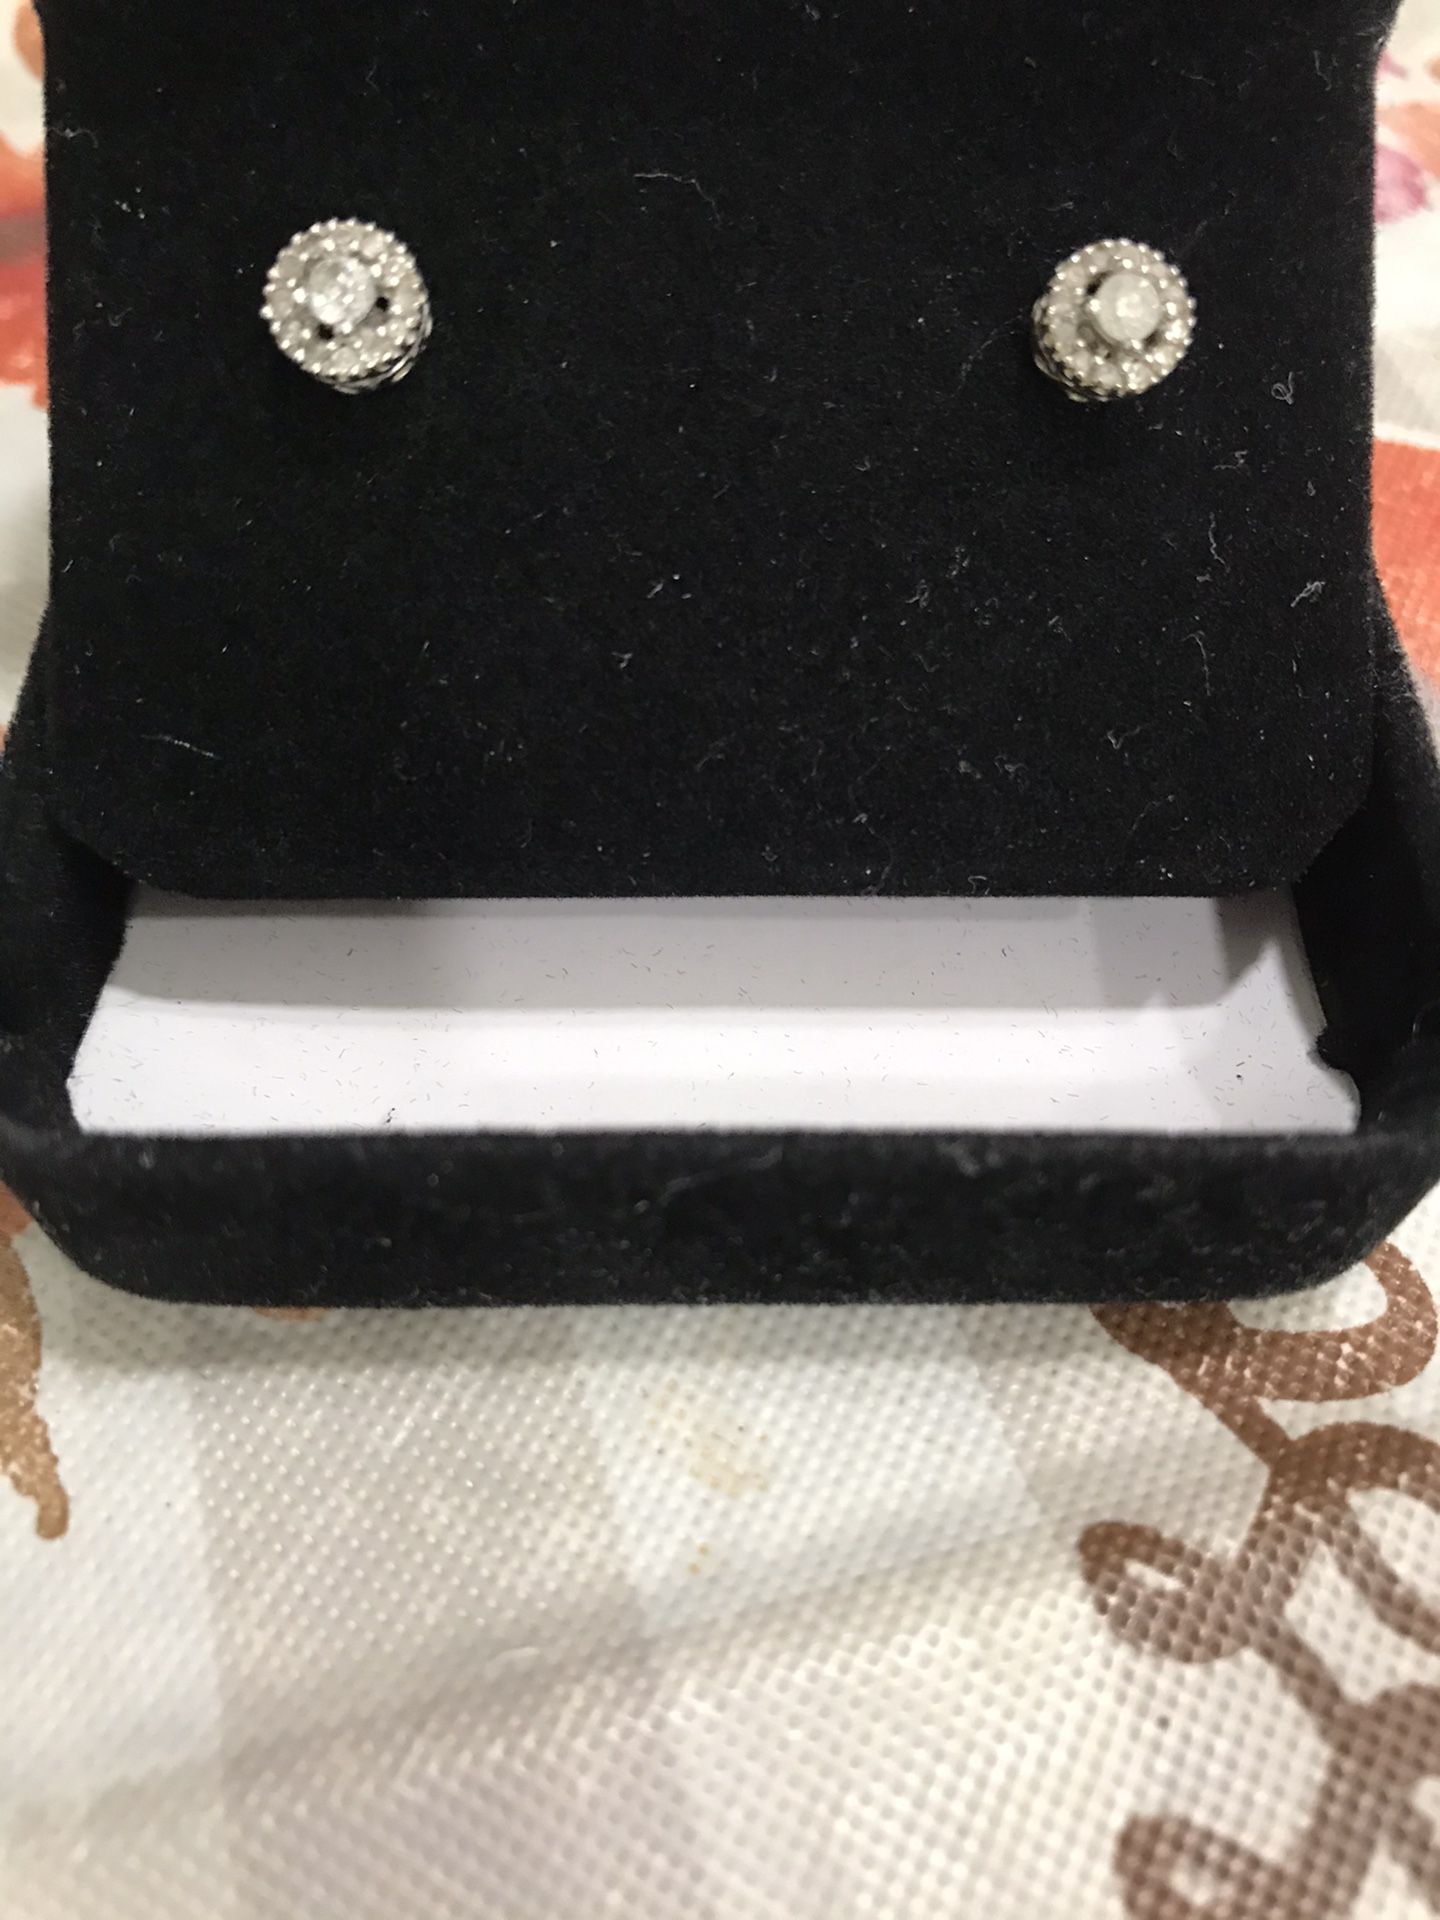 White gold Genuined diamond earrings $200 Pick up only  Firm on price